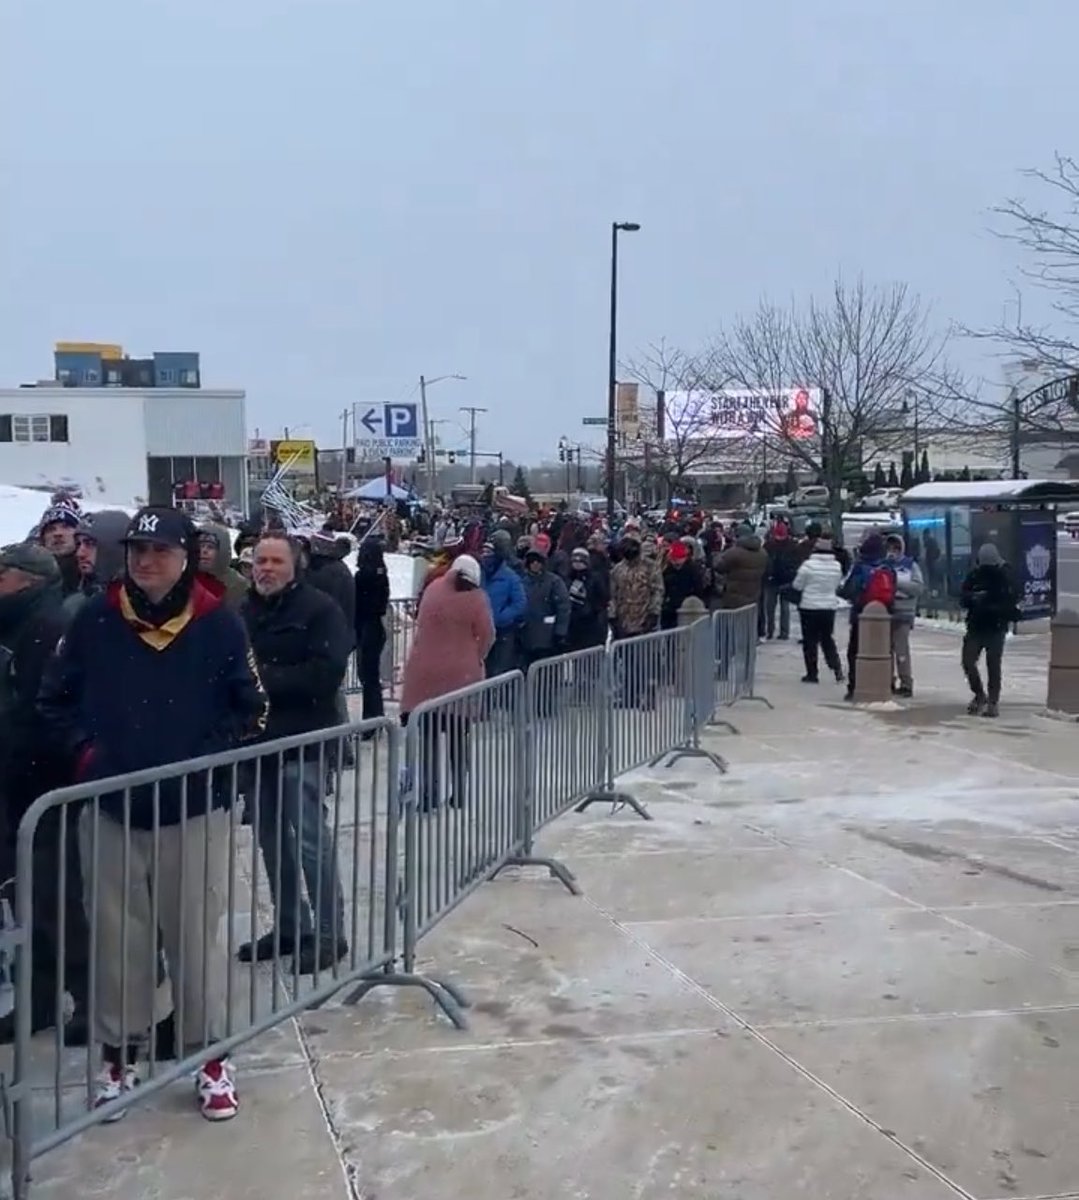 Crowds wait outside in subzero temperatures from 4 pm to attend #Trump rally at #SHNUArena in Manchester, New Hampshire.